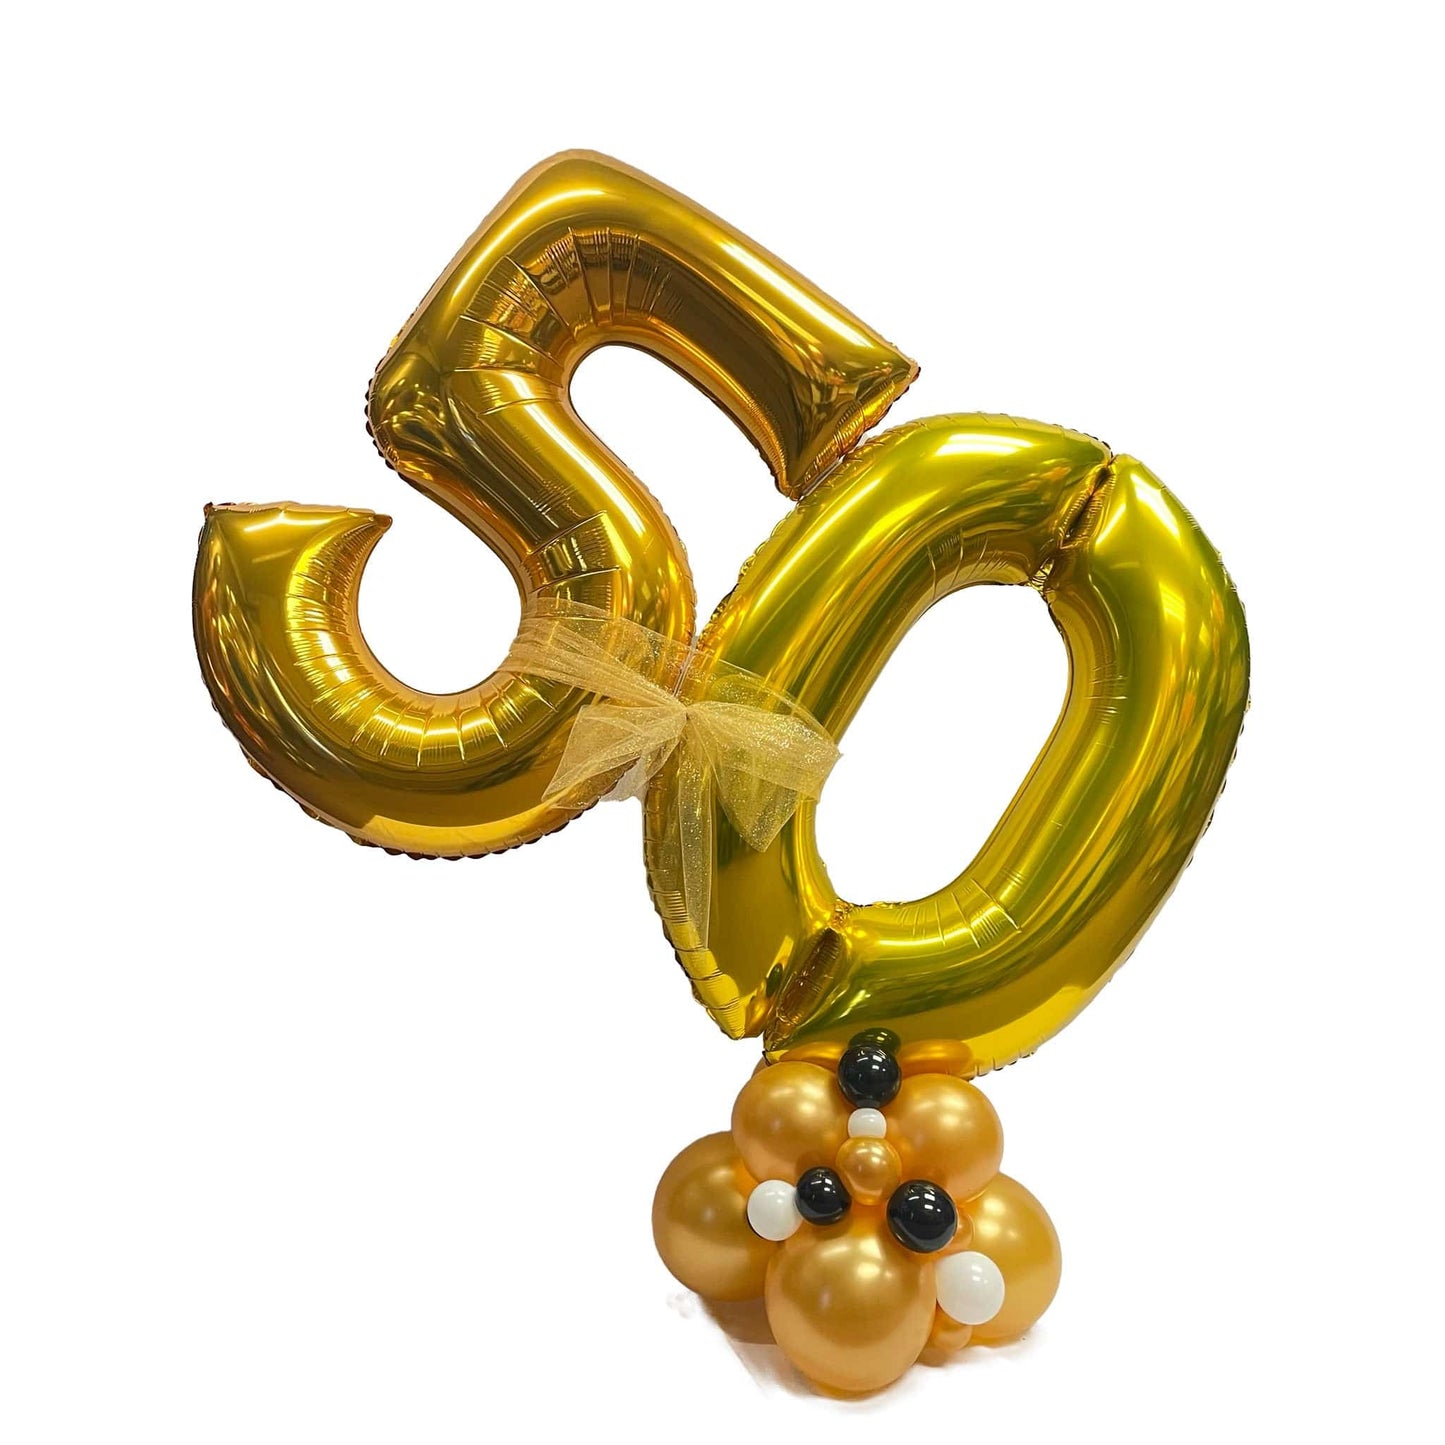 Castle Balloons Gold Number Display